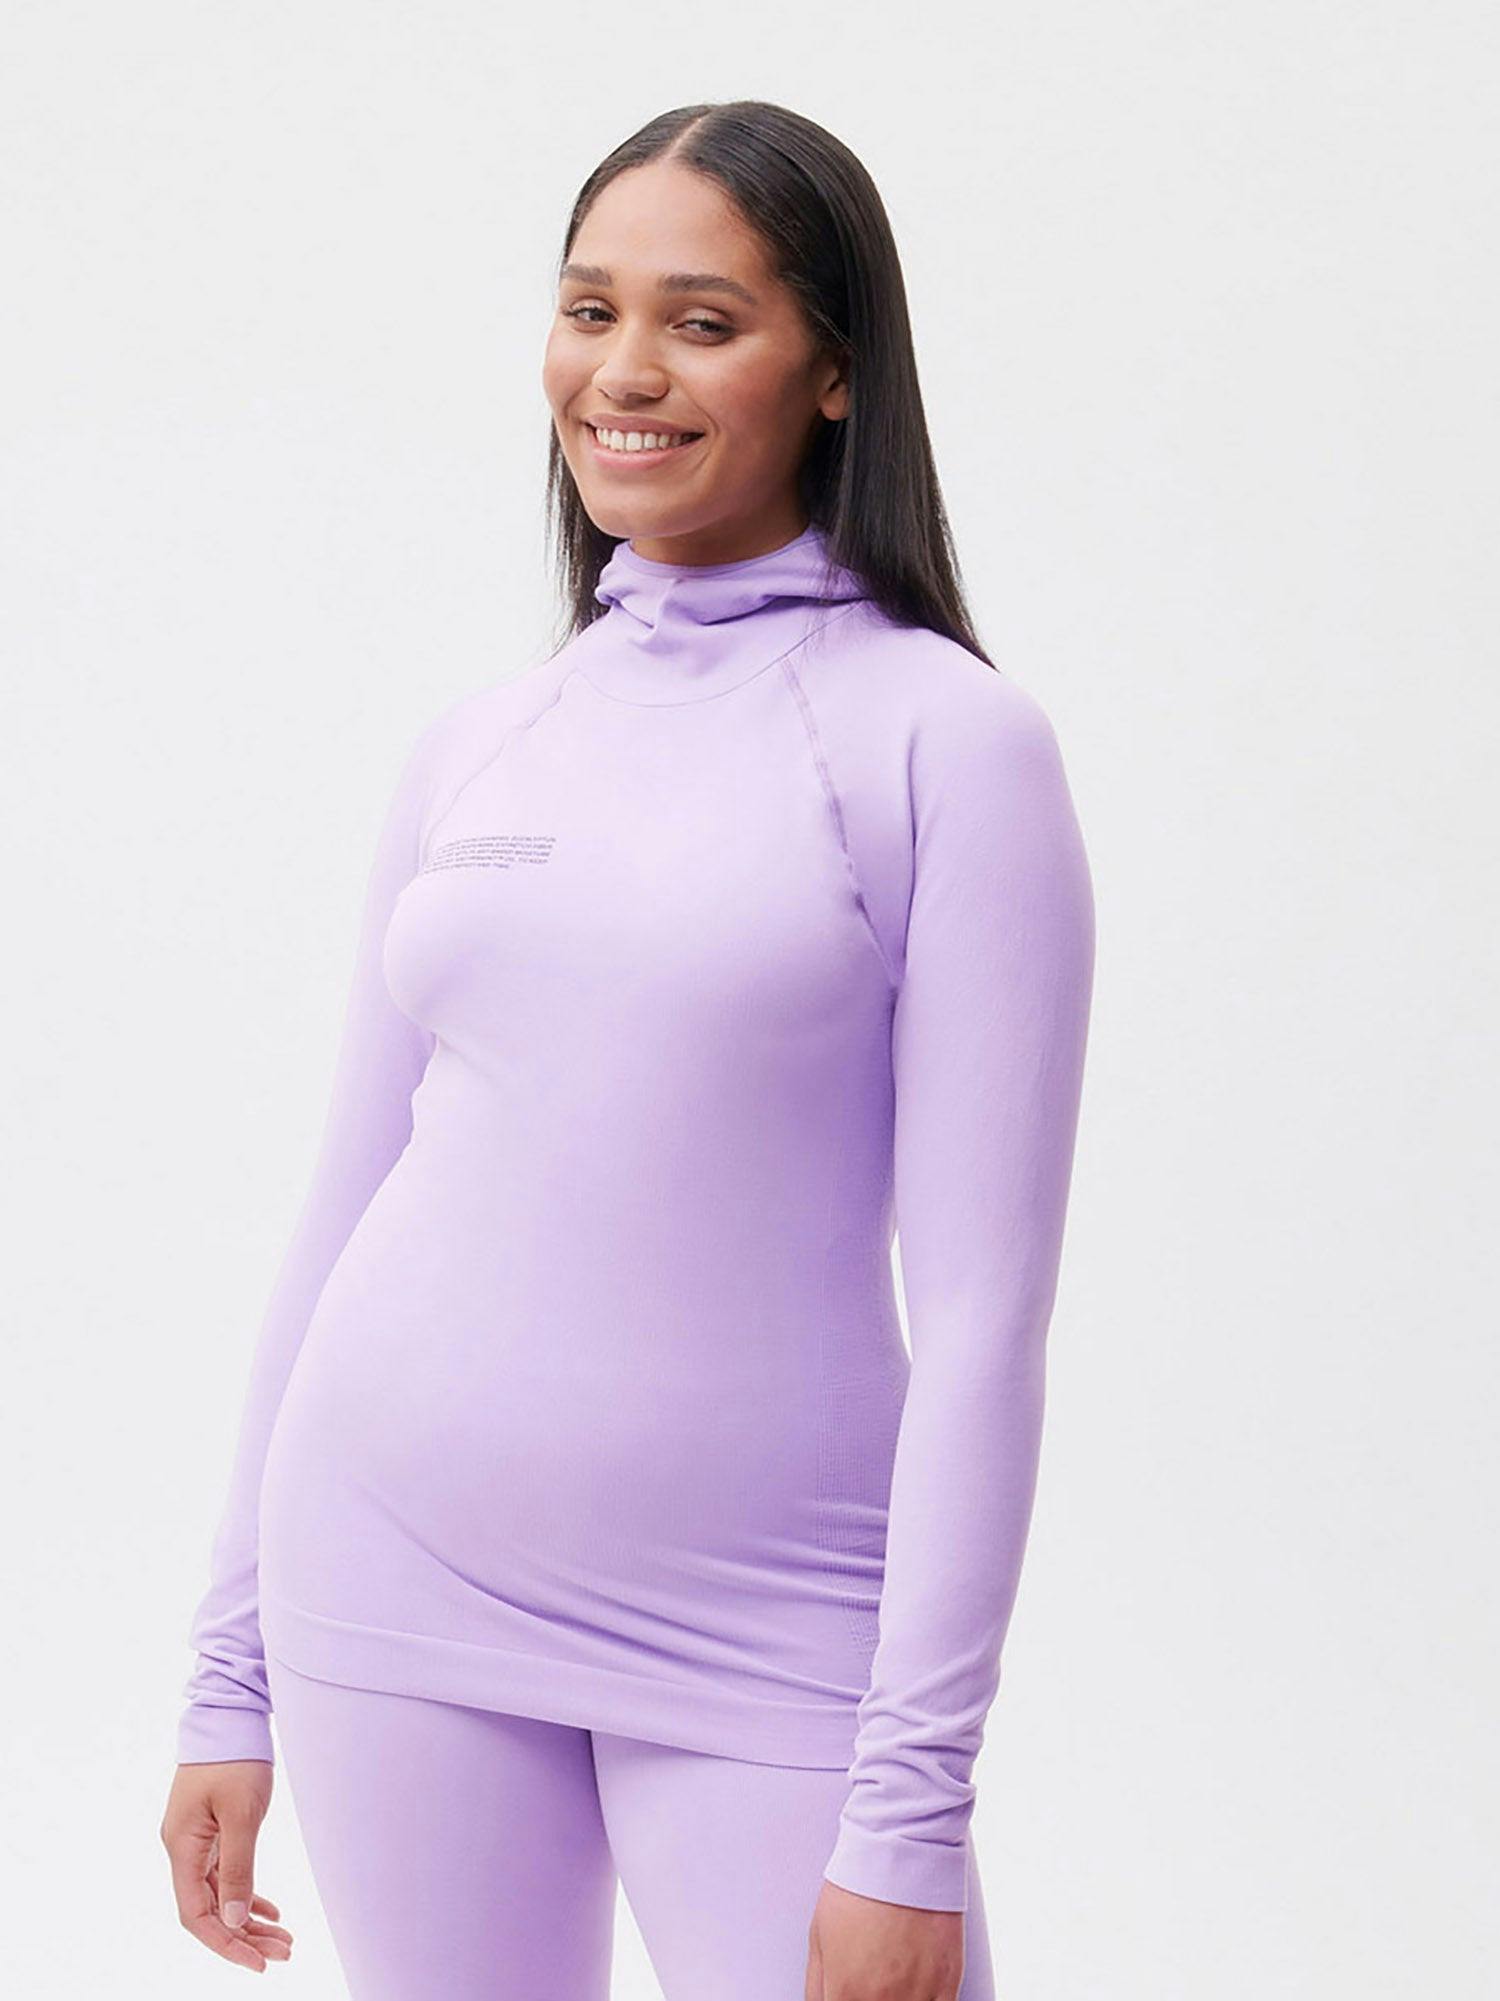 https://cdn.shopify.com/s/files/1/0035/1309/0115/products/Activewear-Womens-Hoodie-Orchid-Purple-1_4618a96b-fb83-4a6f-85fa-1a03fa30be65.jpg?v=1662475885